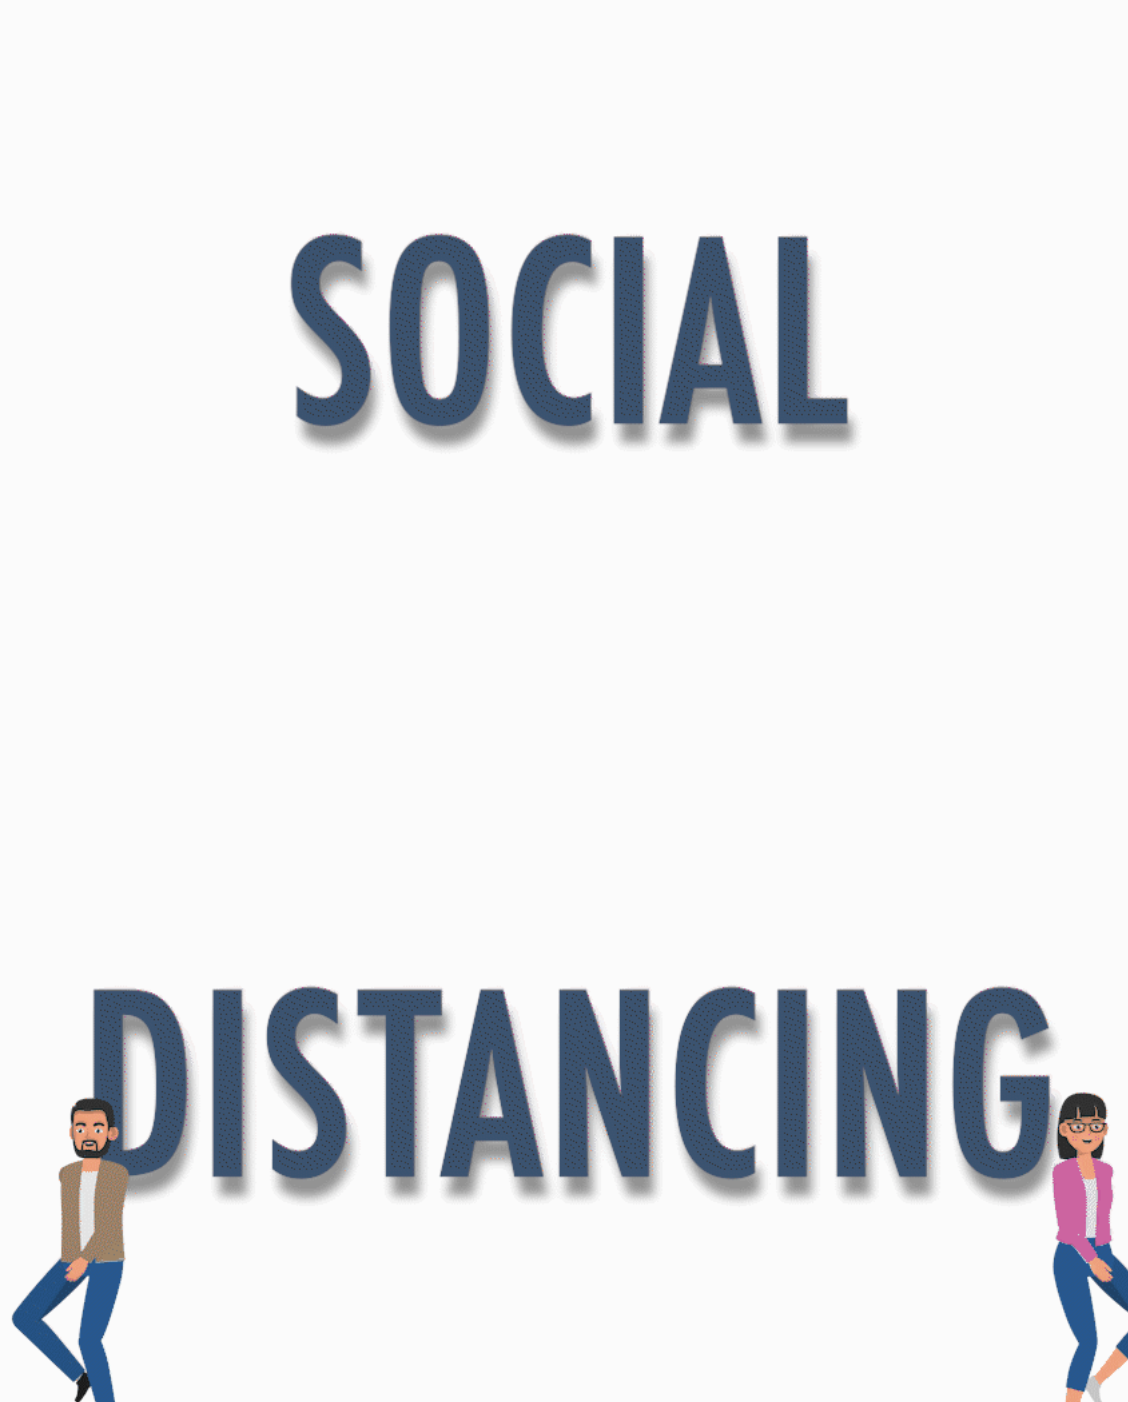 How to Practice Social Distancing